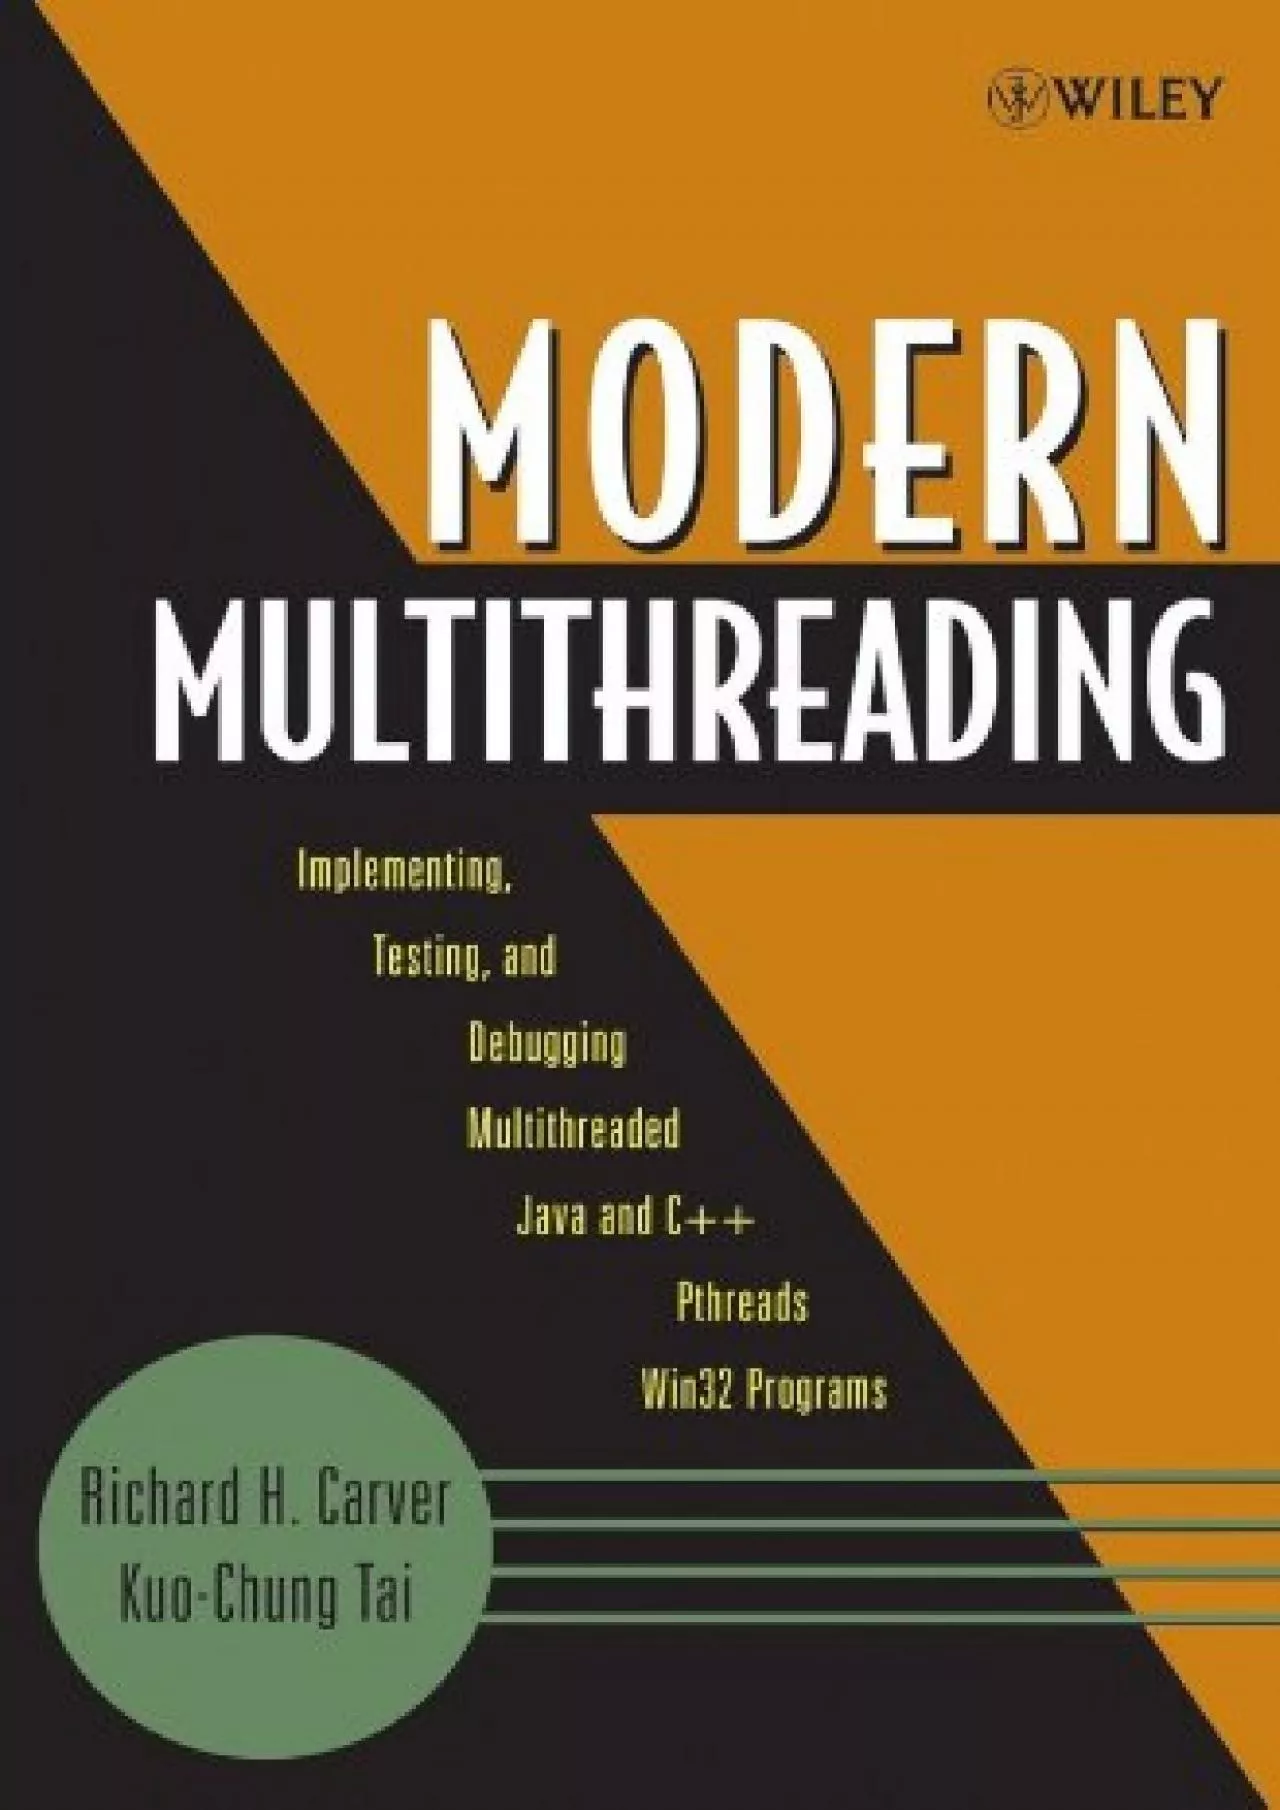 [READING BOOK]-Modern Multithreading : Implementing, Testing, and Debugging Multithreaded